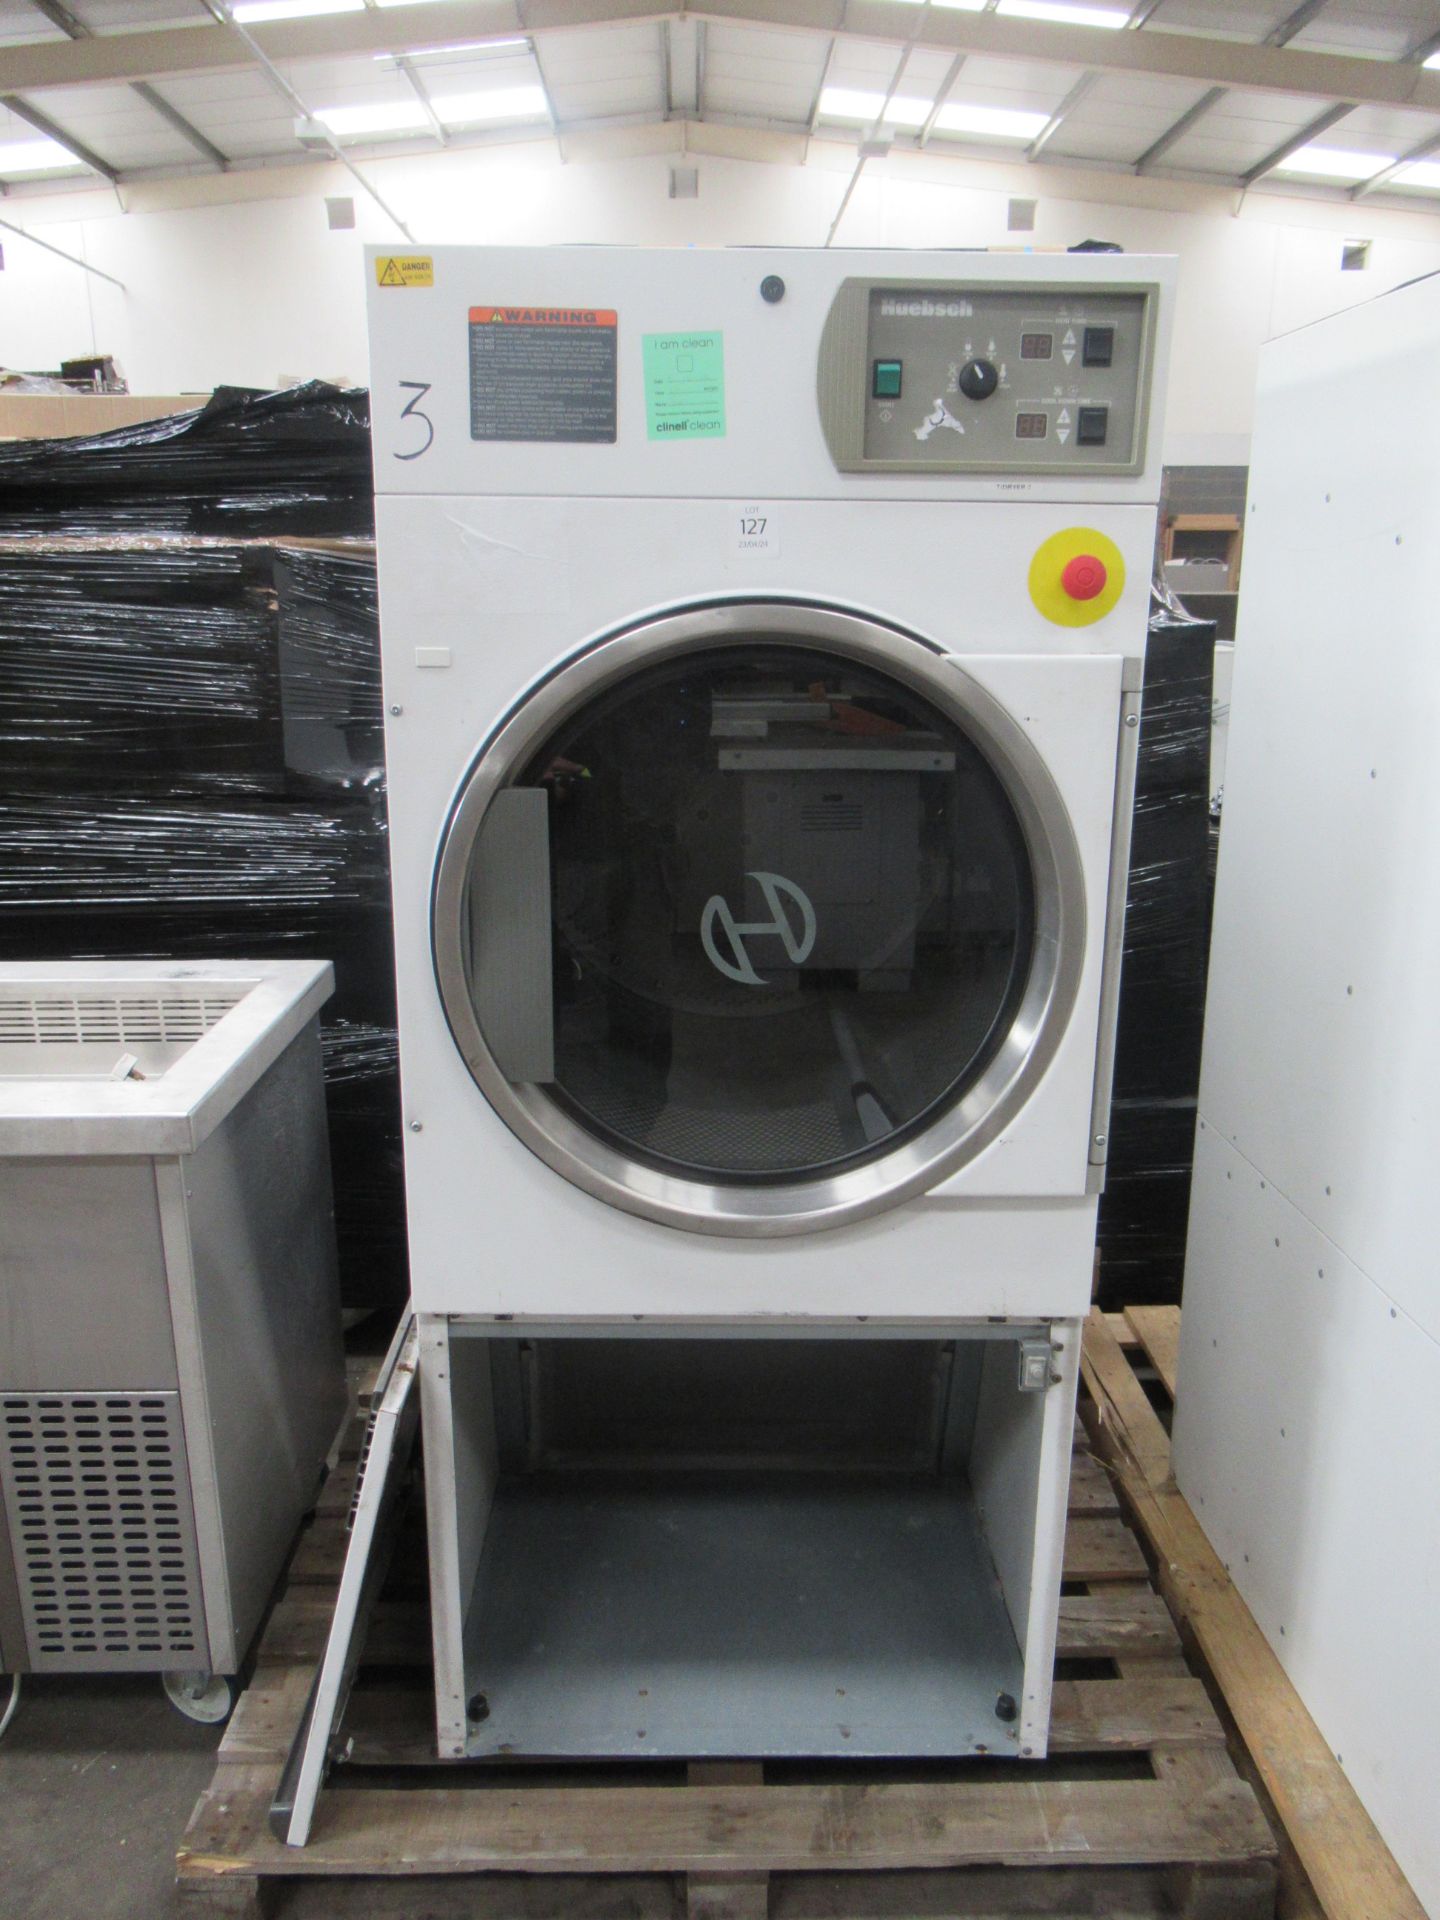 Huebsch Commercial Tumble Dryer- 3PH